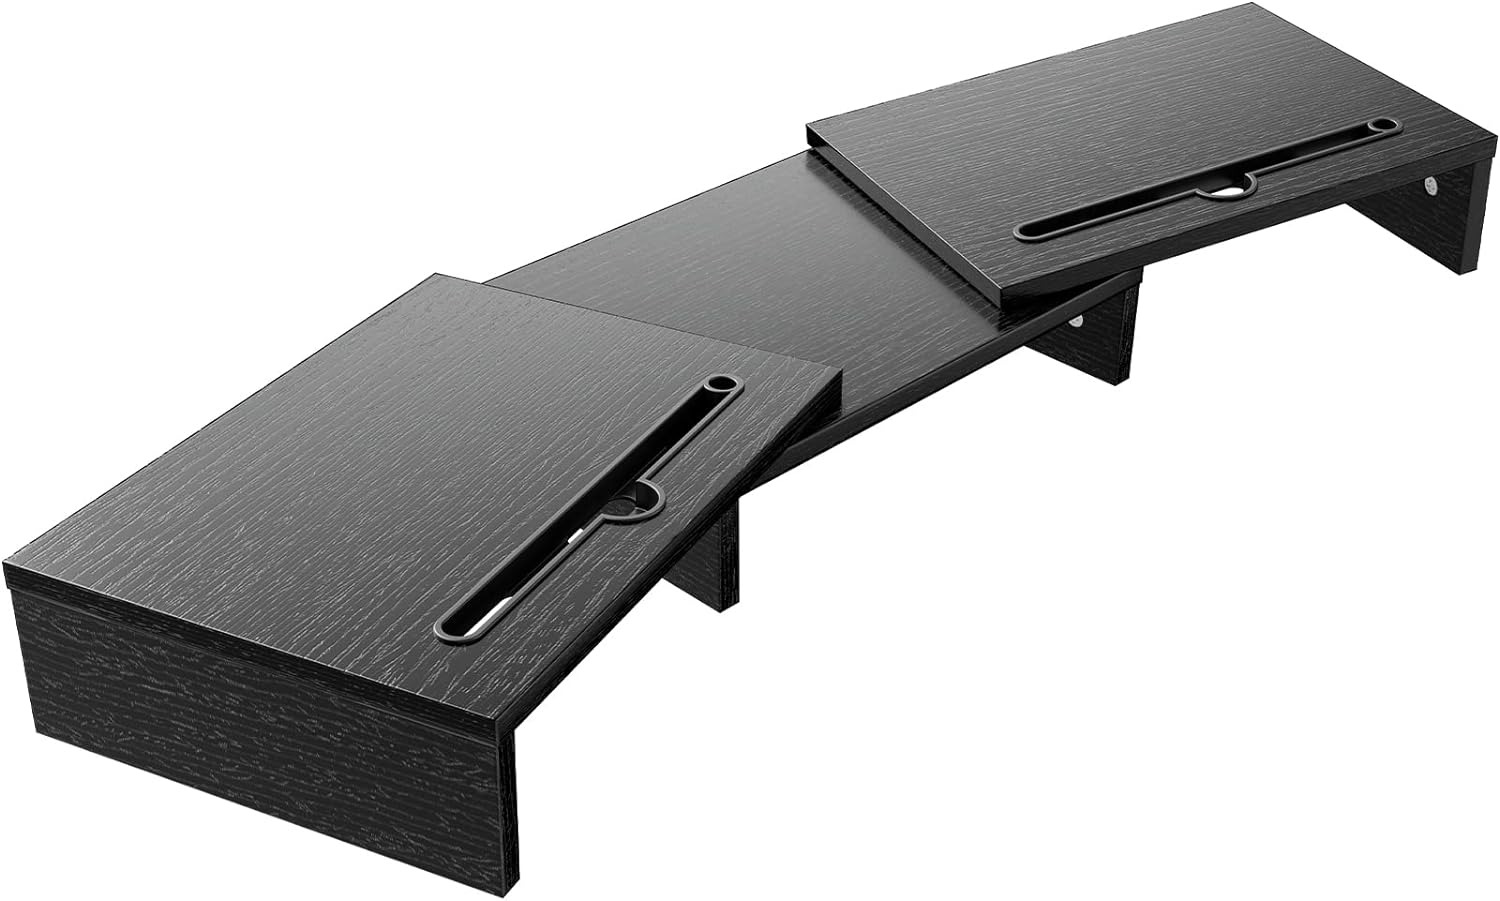 LORYERGO Dual Monitor Stand - [Upgraded] Monitor Stand w/ 2 Slots for Phone & T